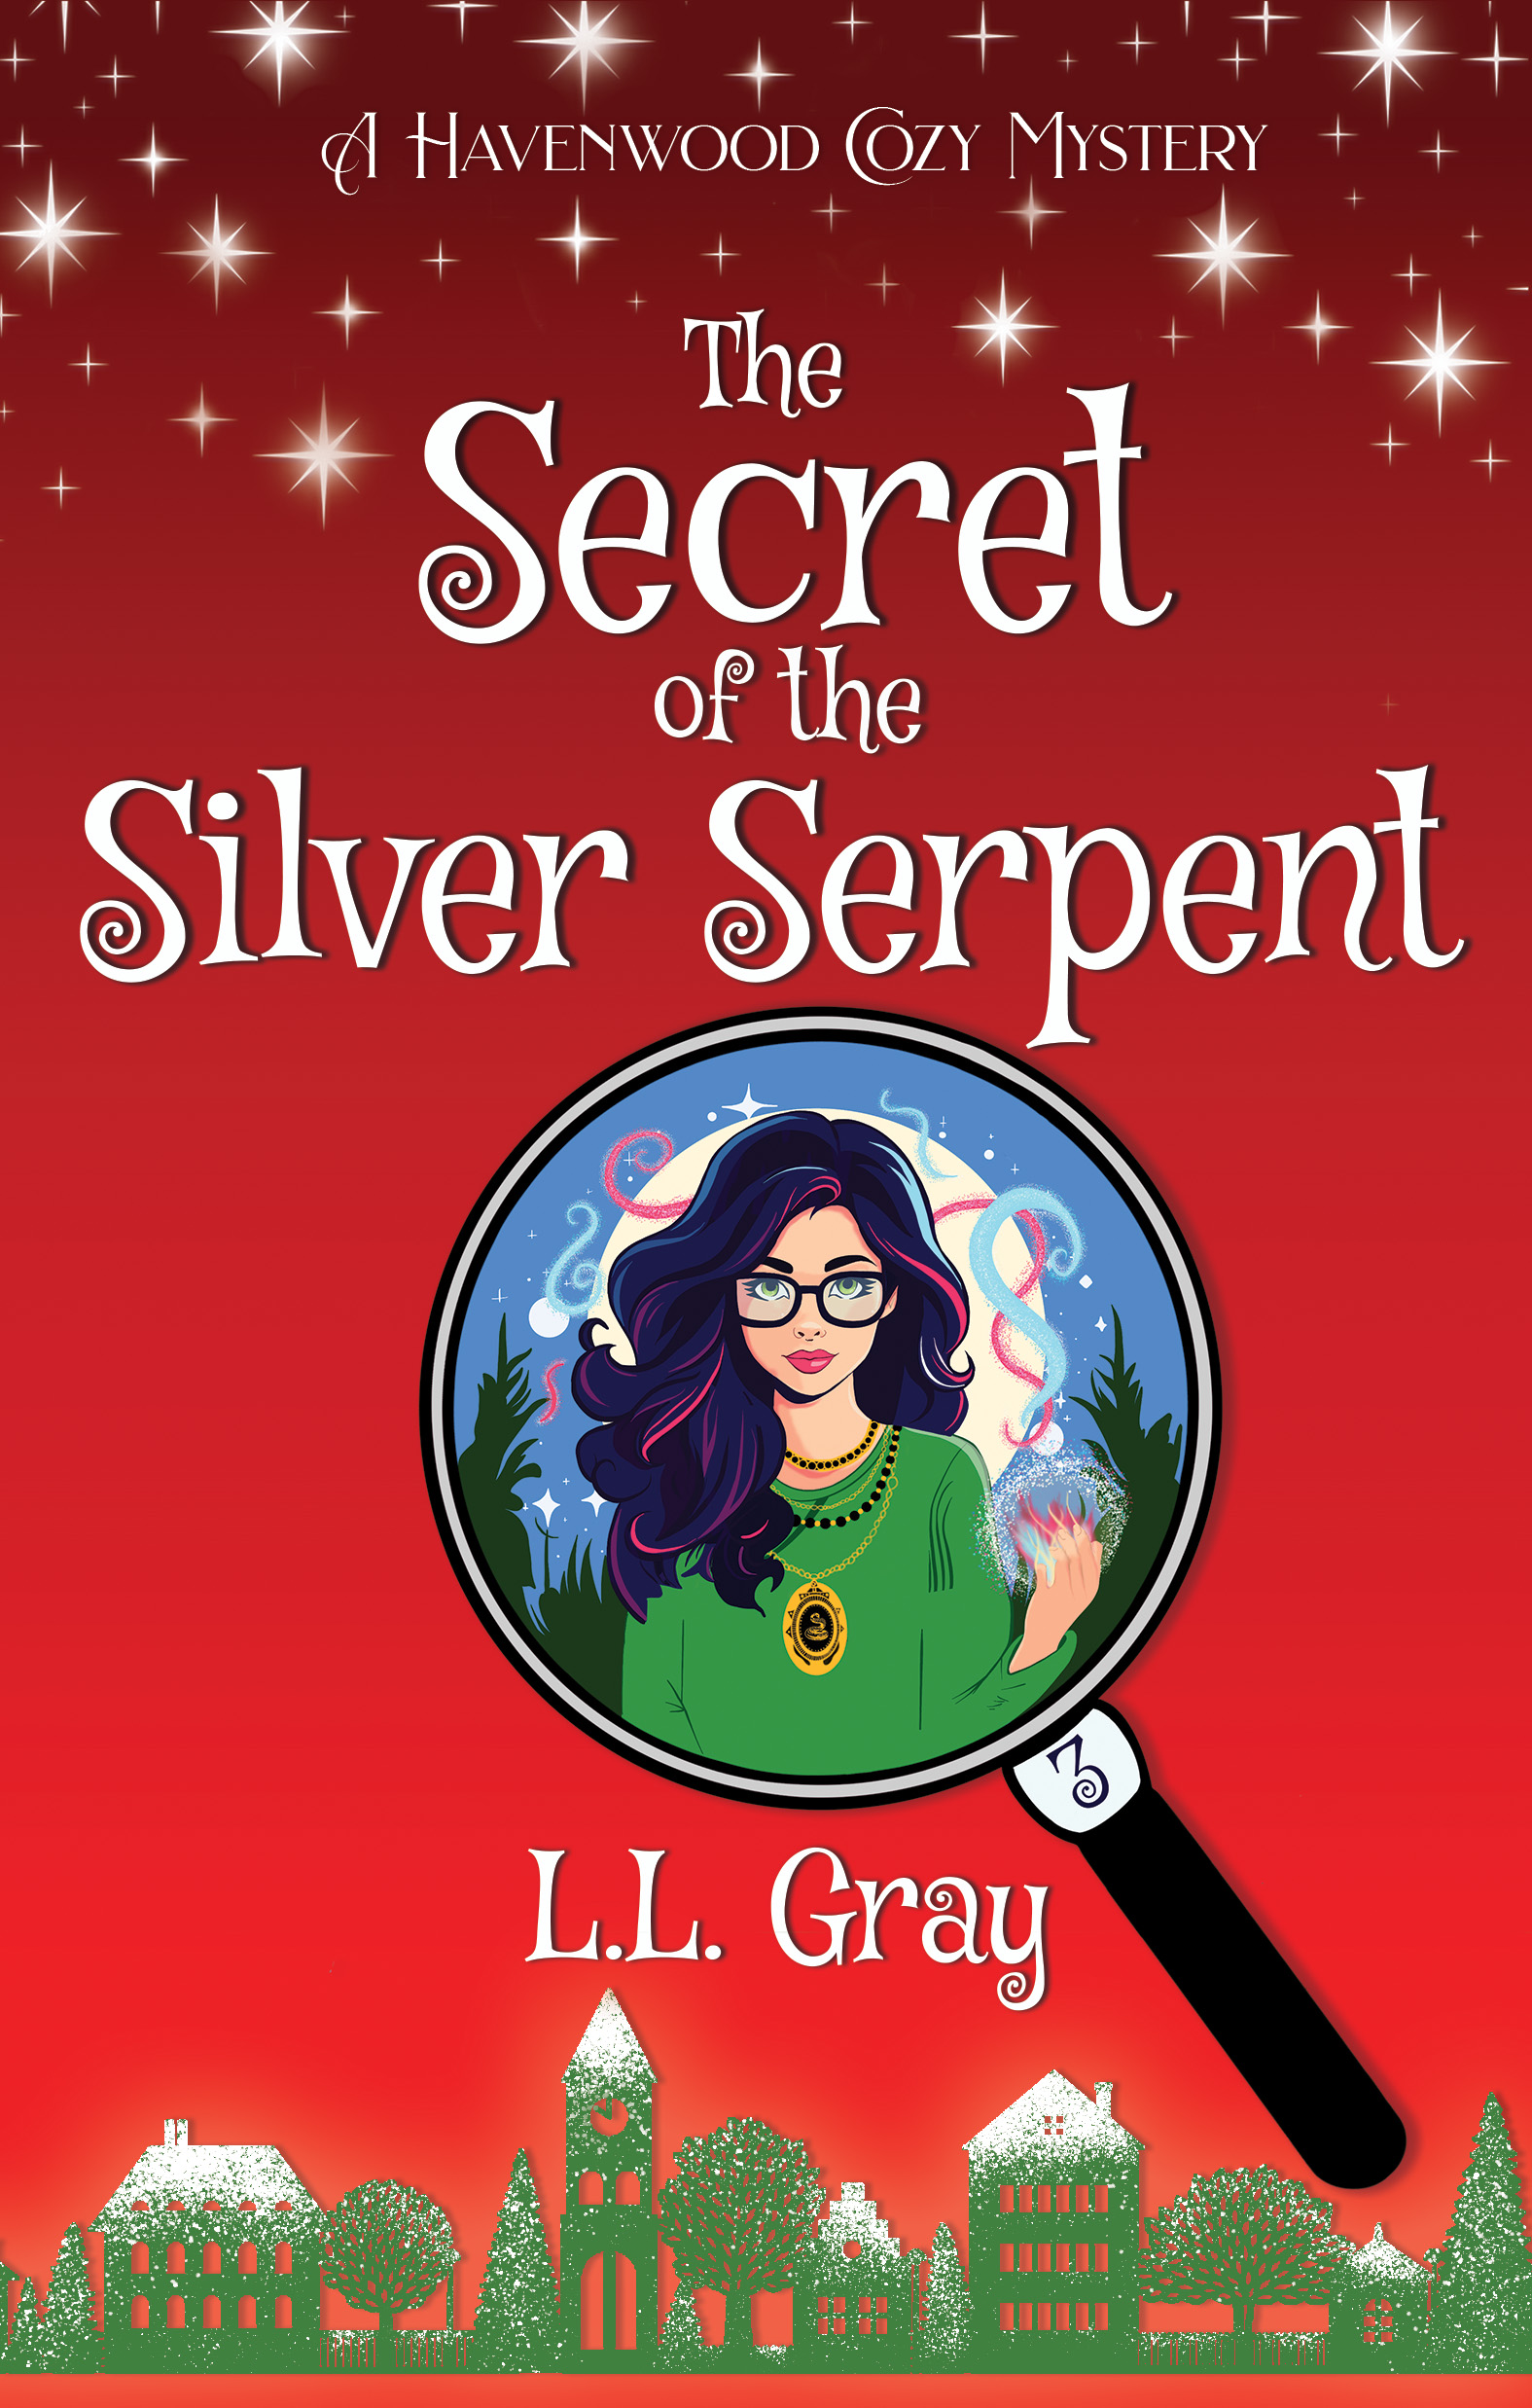 The Secret of the Silver Serpent